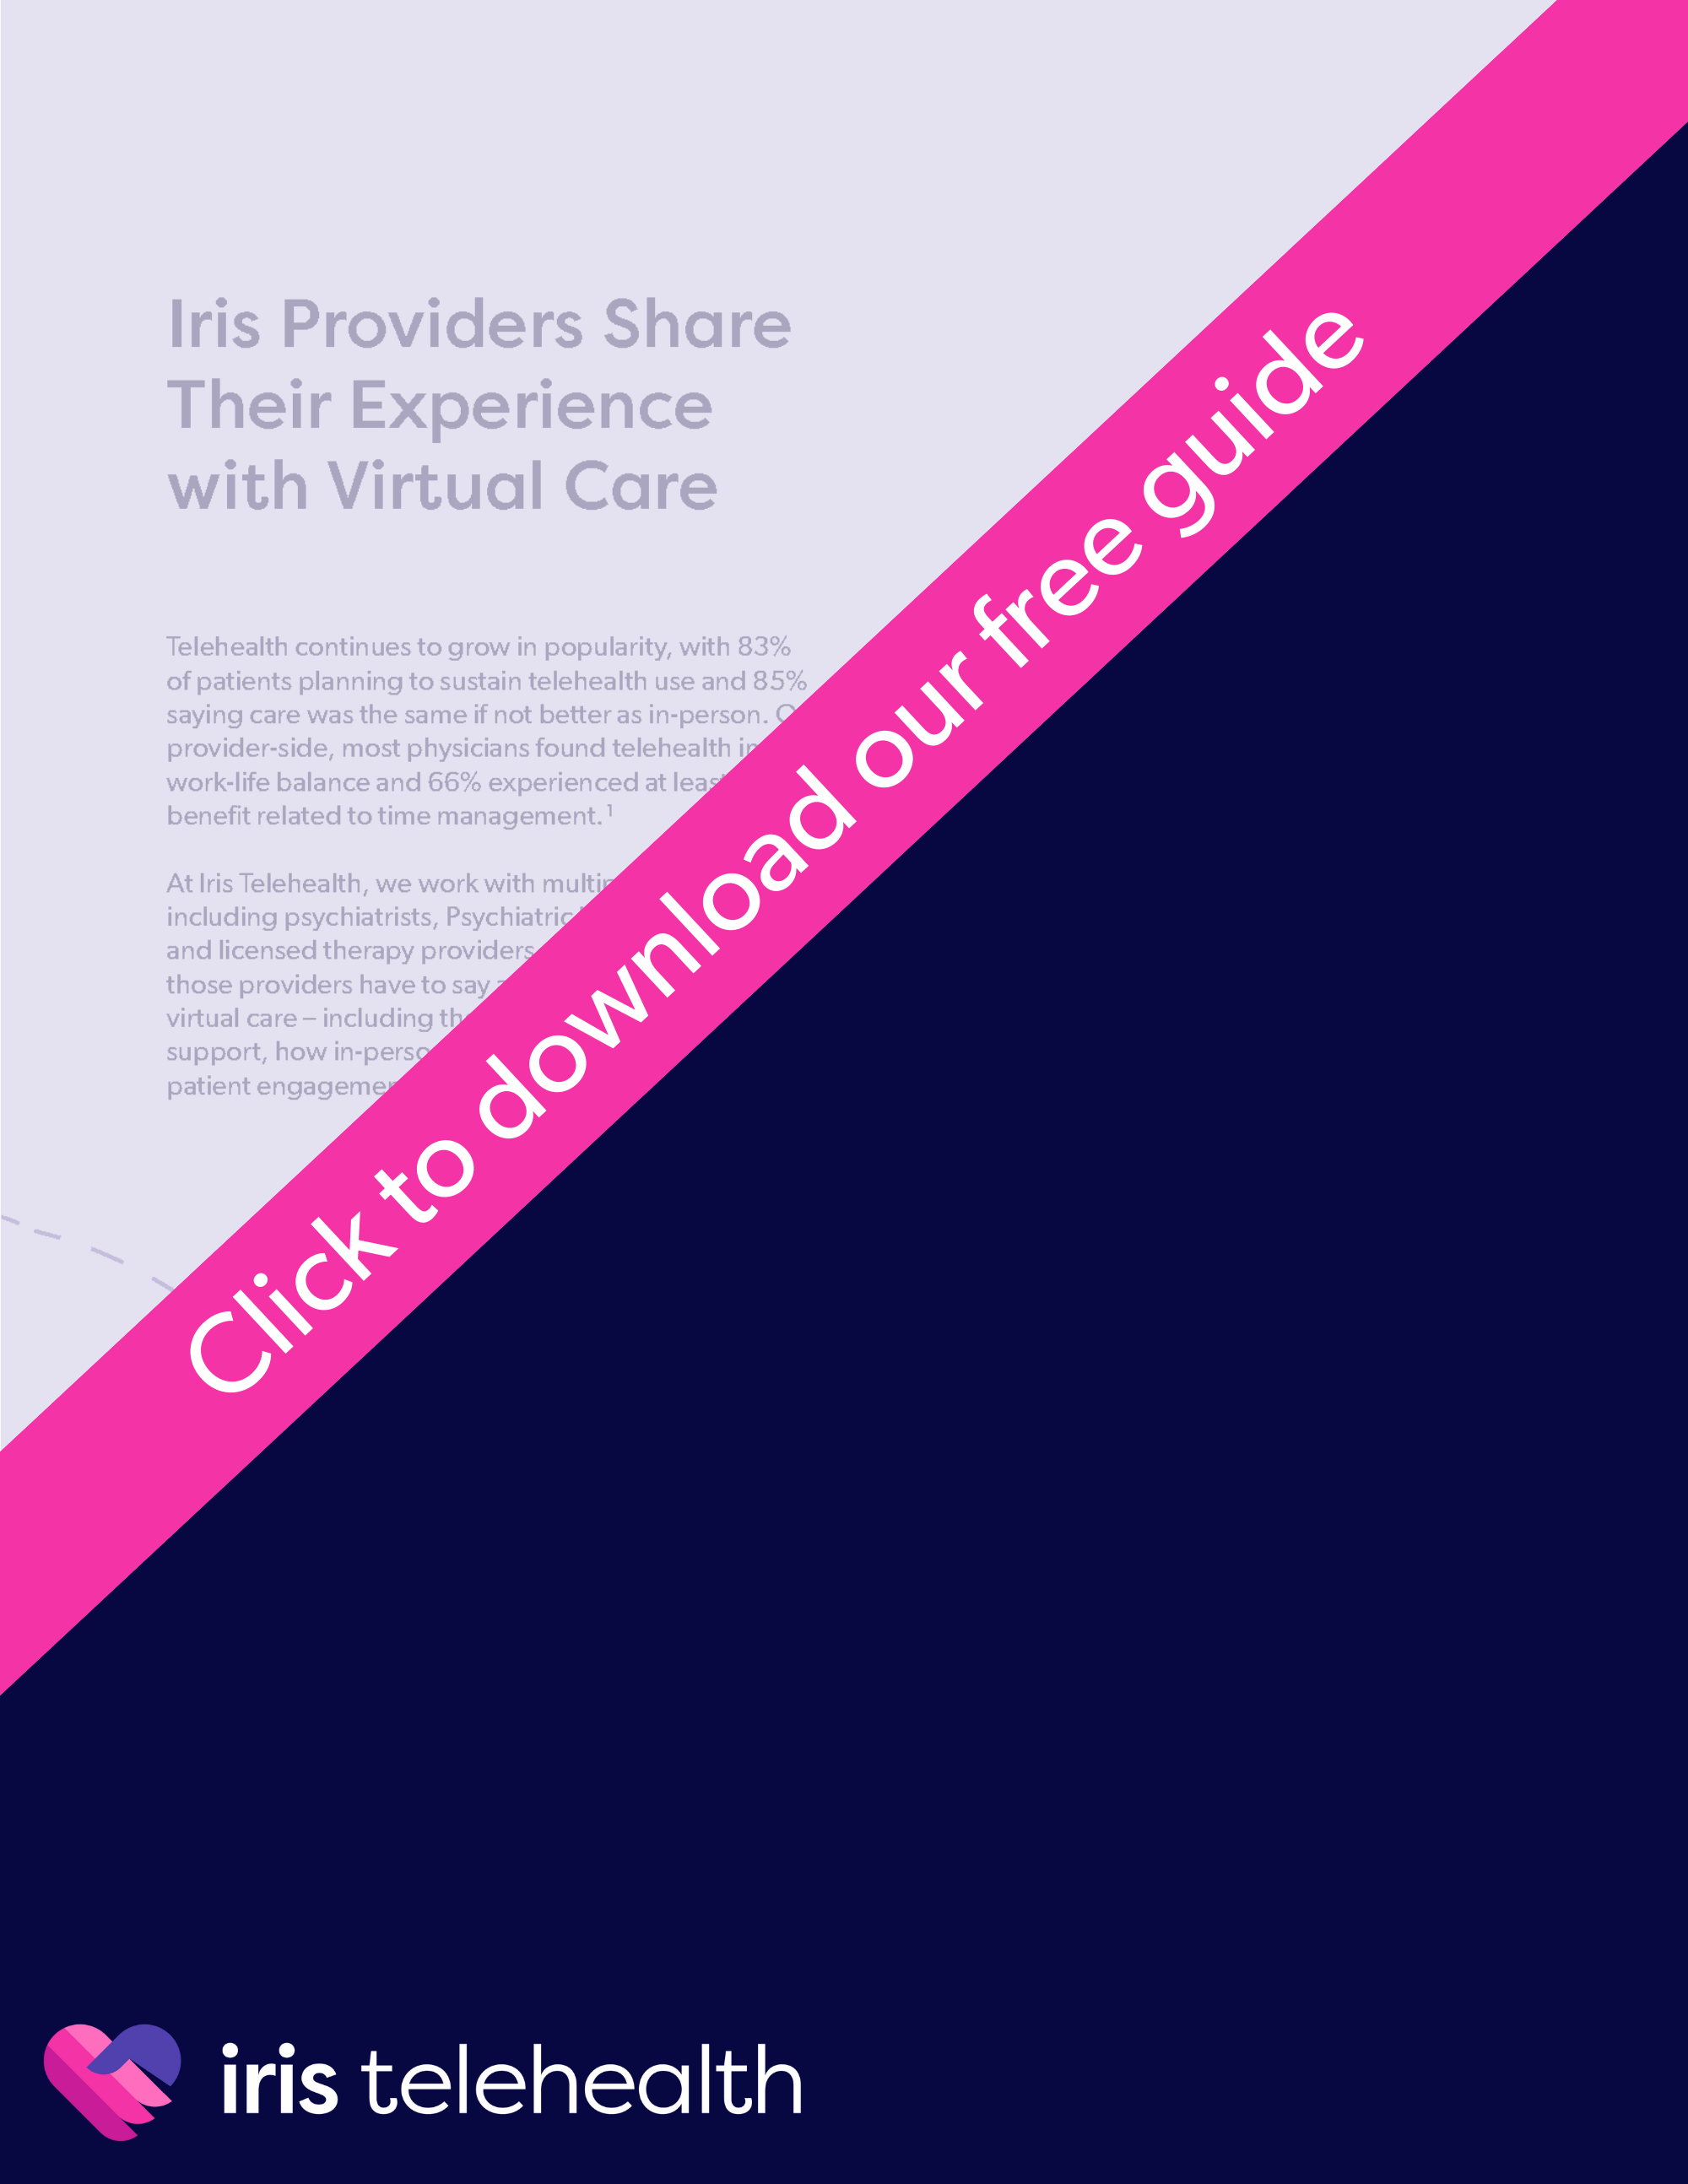 Iris Providers Share Their Experience with Virtual Care 
